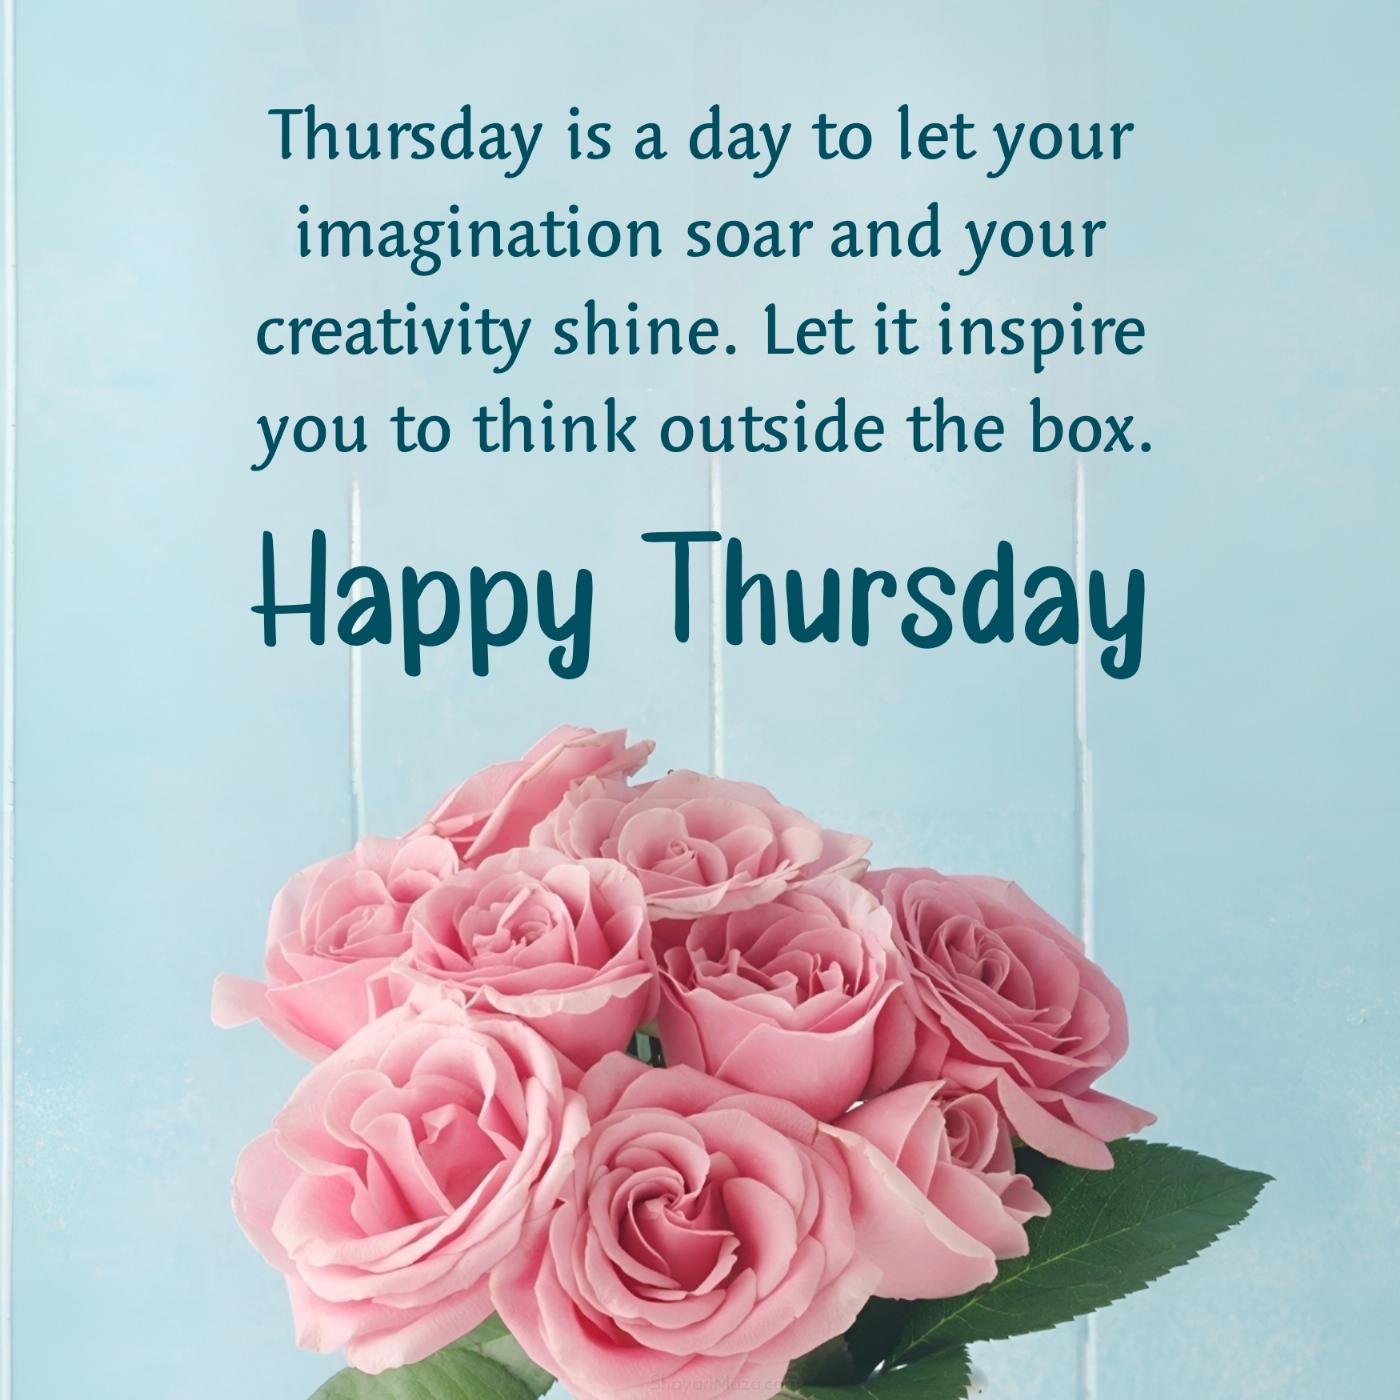 Thursday is a day to let your imagination soar and your creativity shine